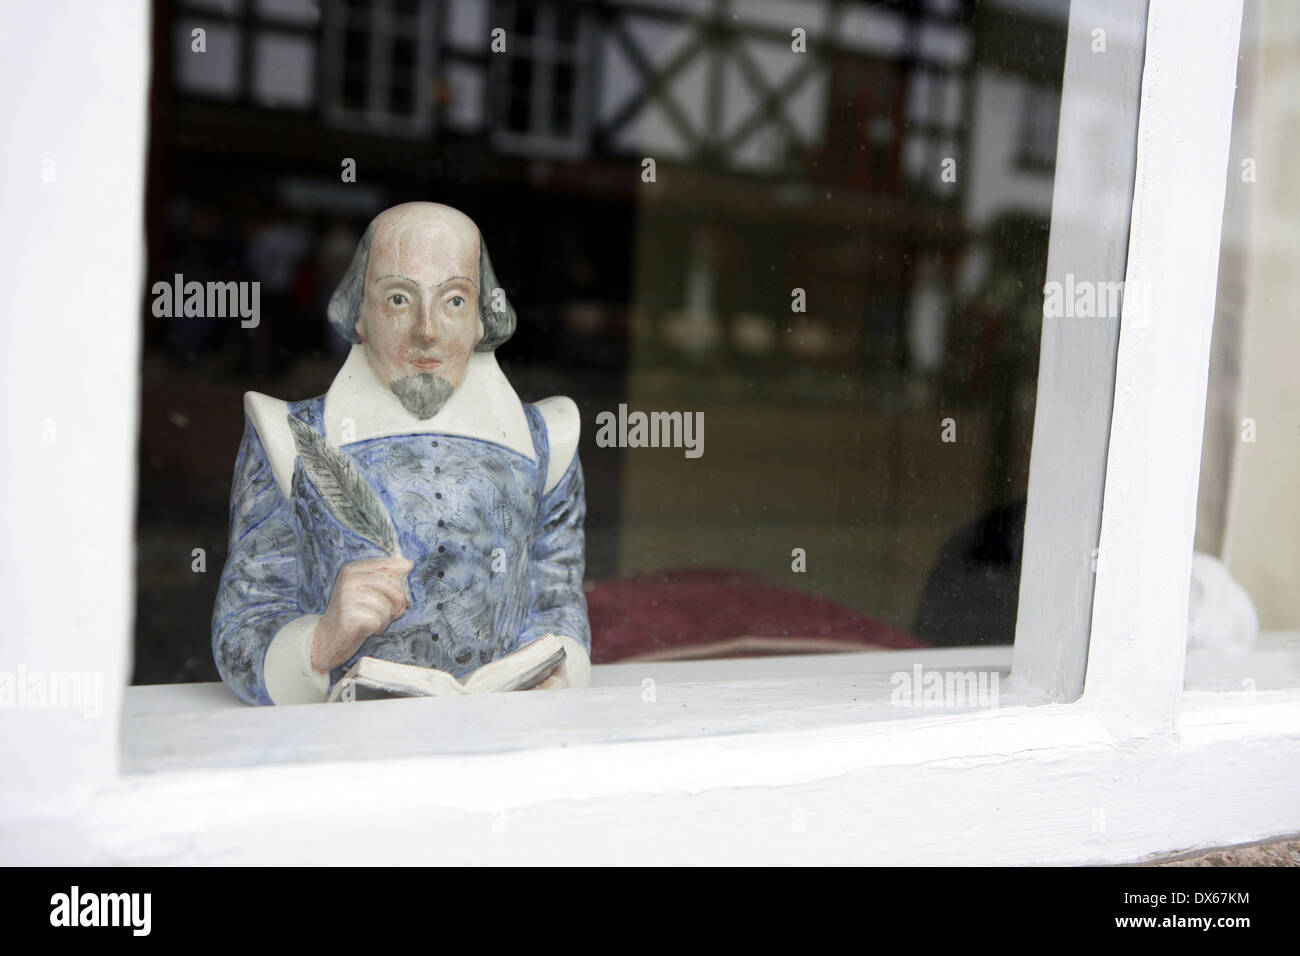 Porcelain bust of William Shakespear looking out of a window , Stratford upon Avon, Stock Photo